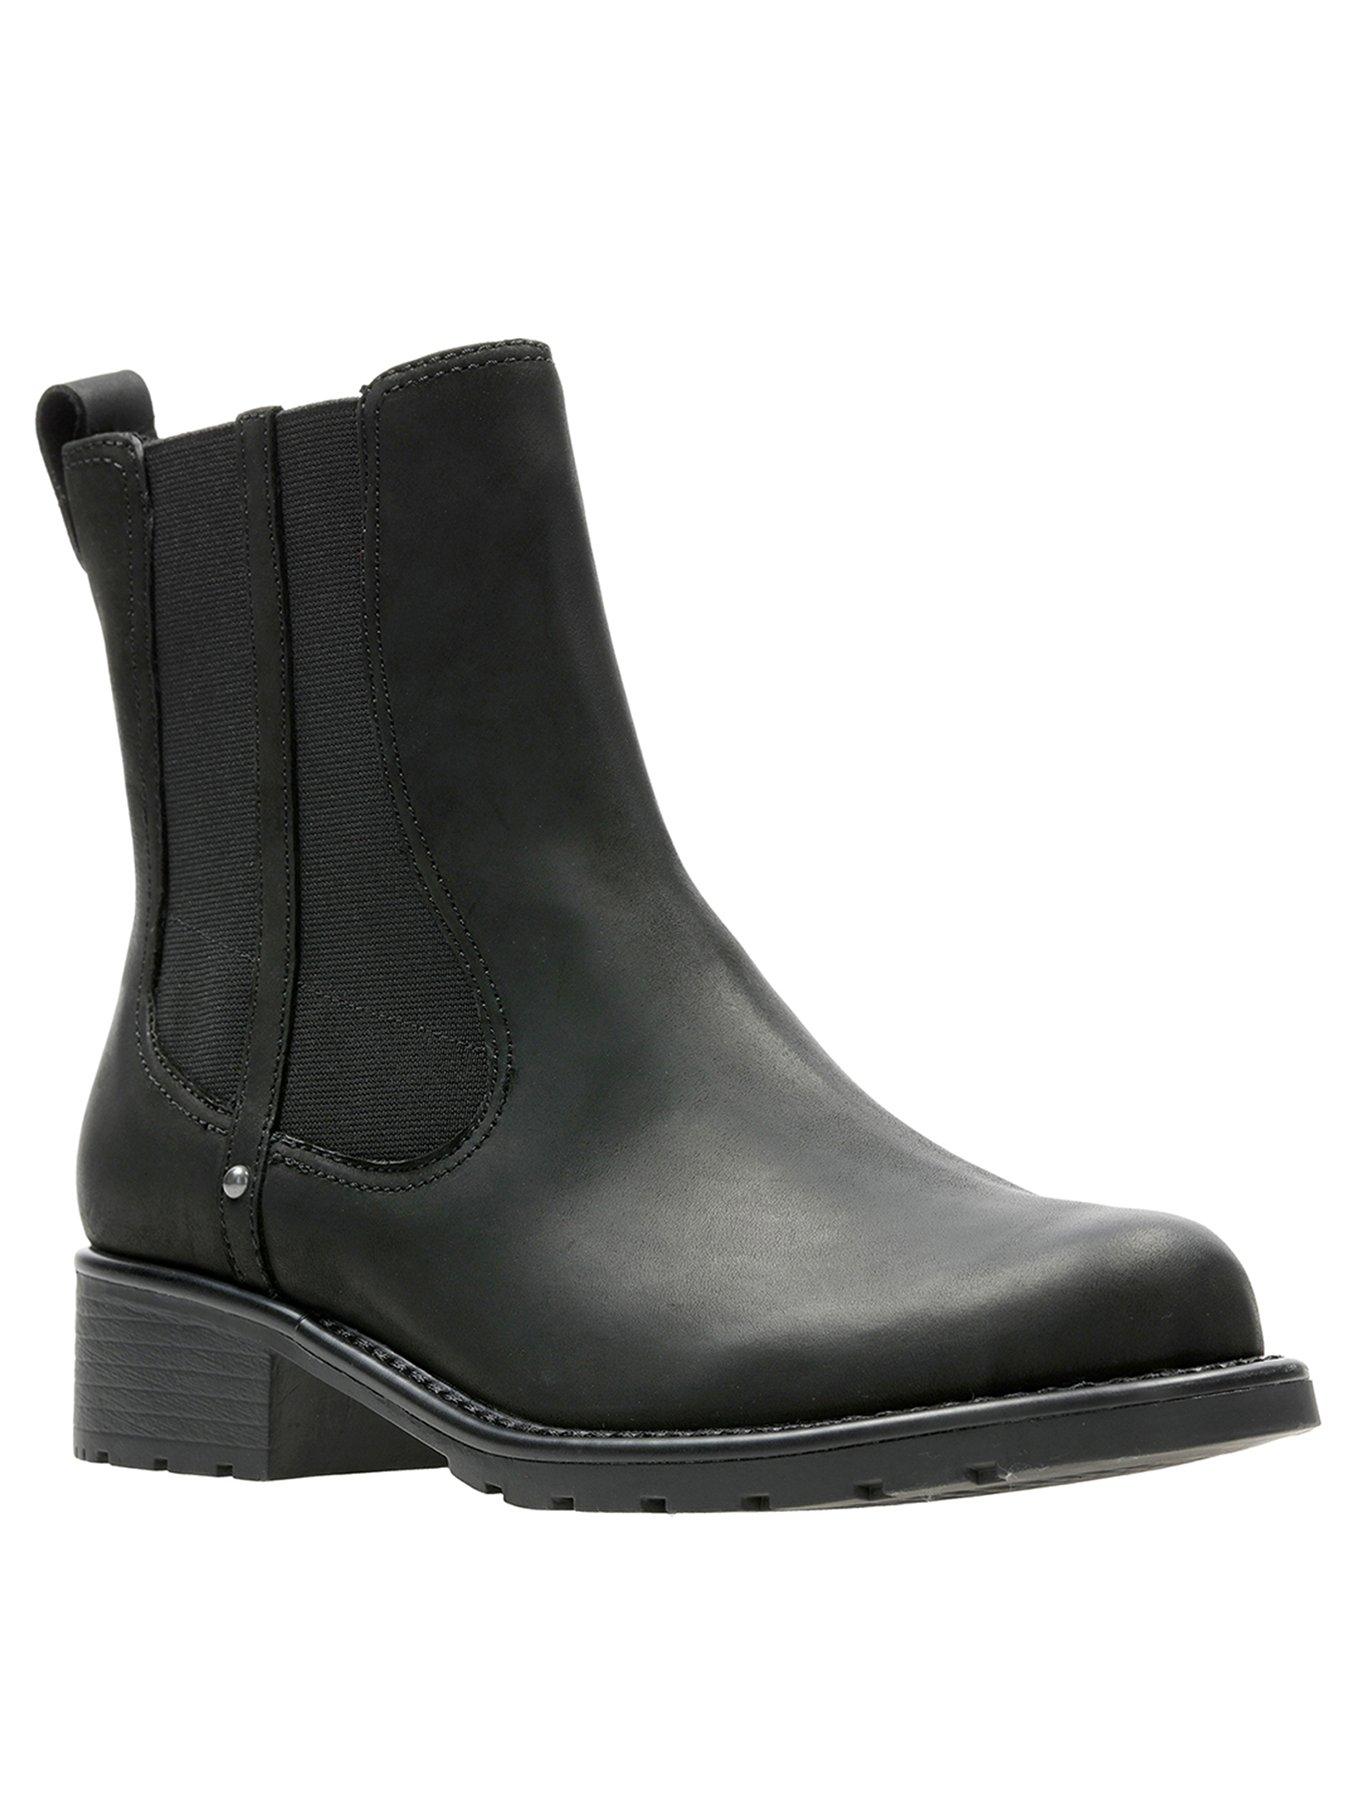 clarks wide fit boots uk